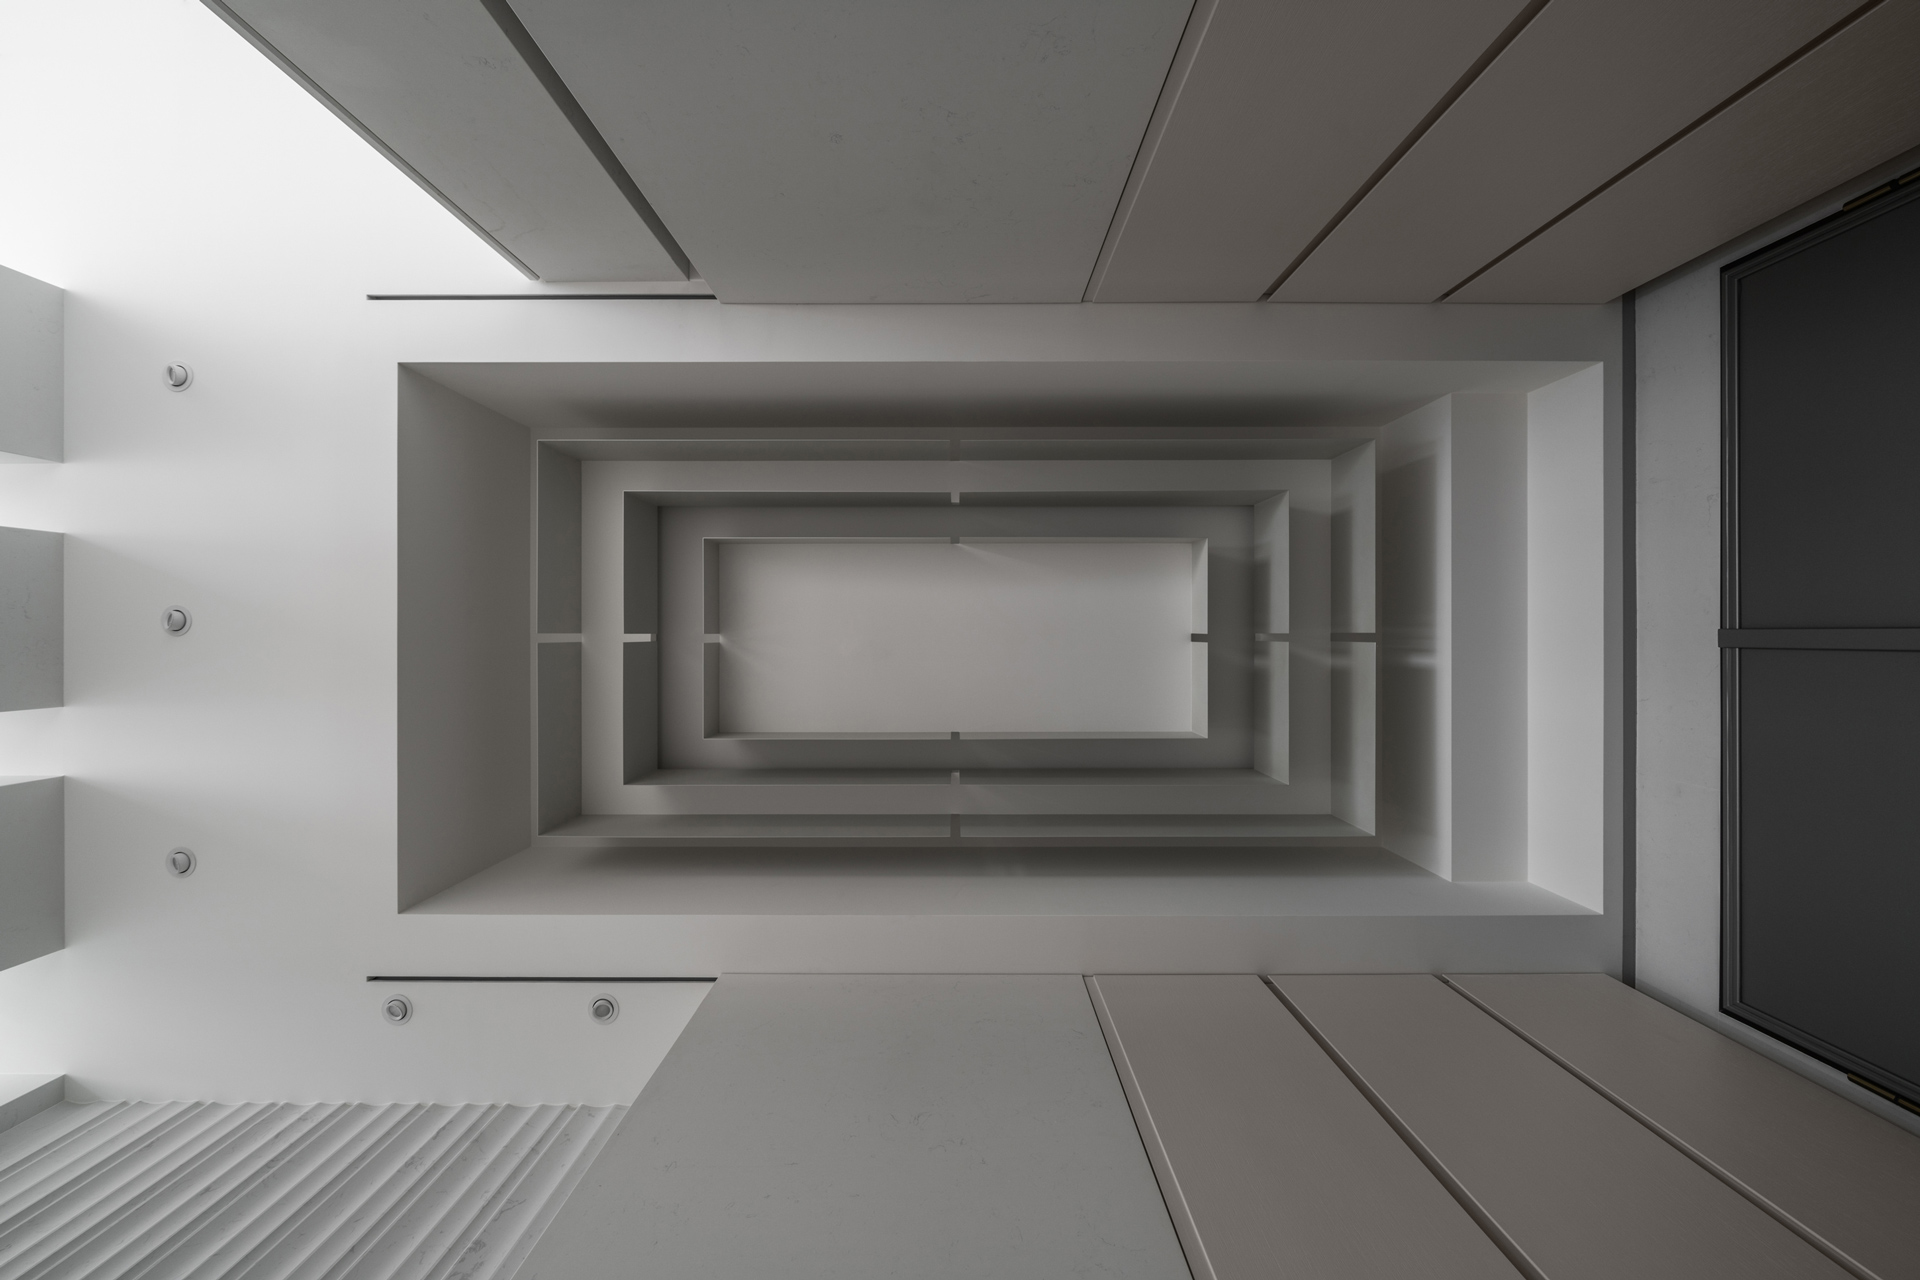 MUSE Design Winners - The Floating Corridor